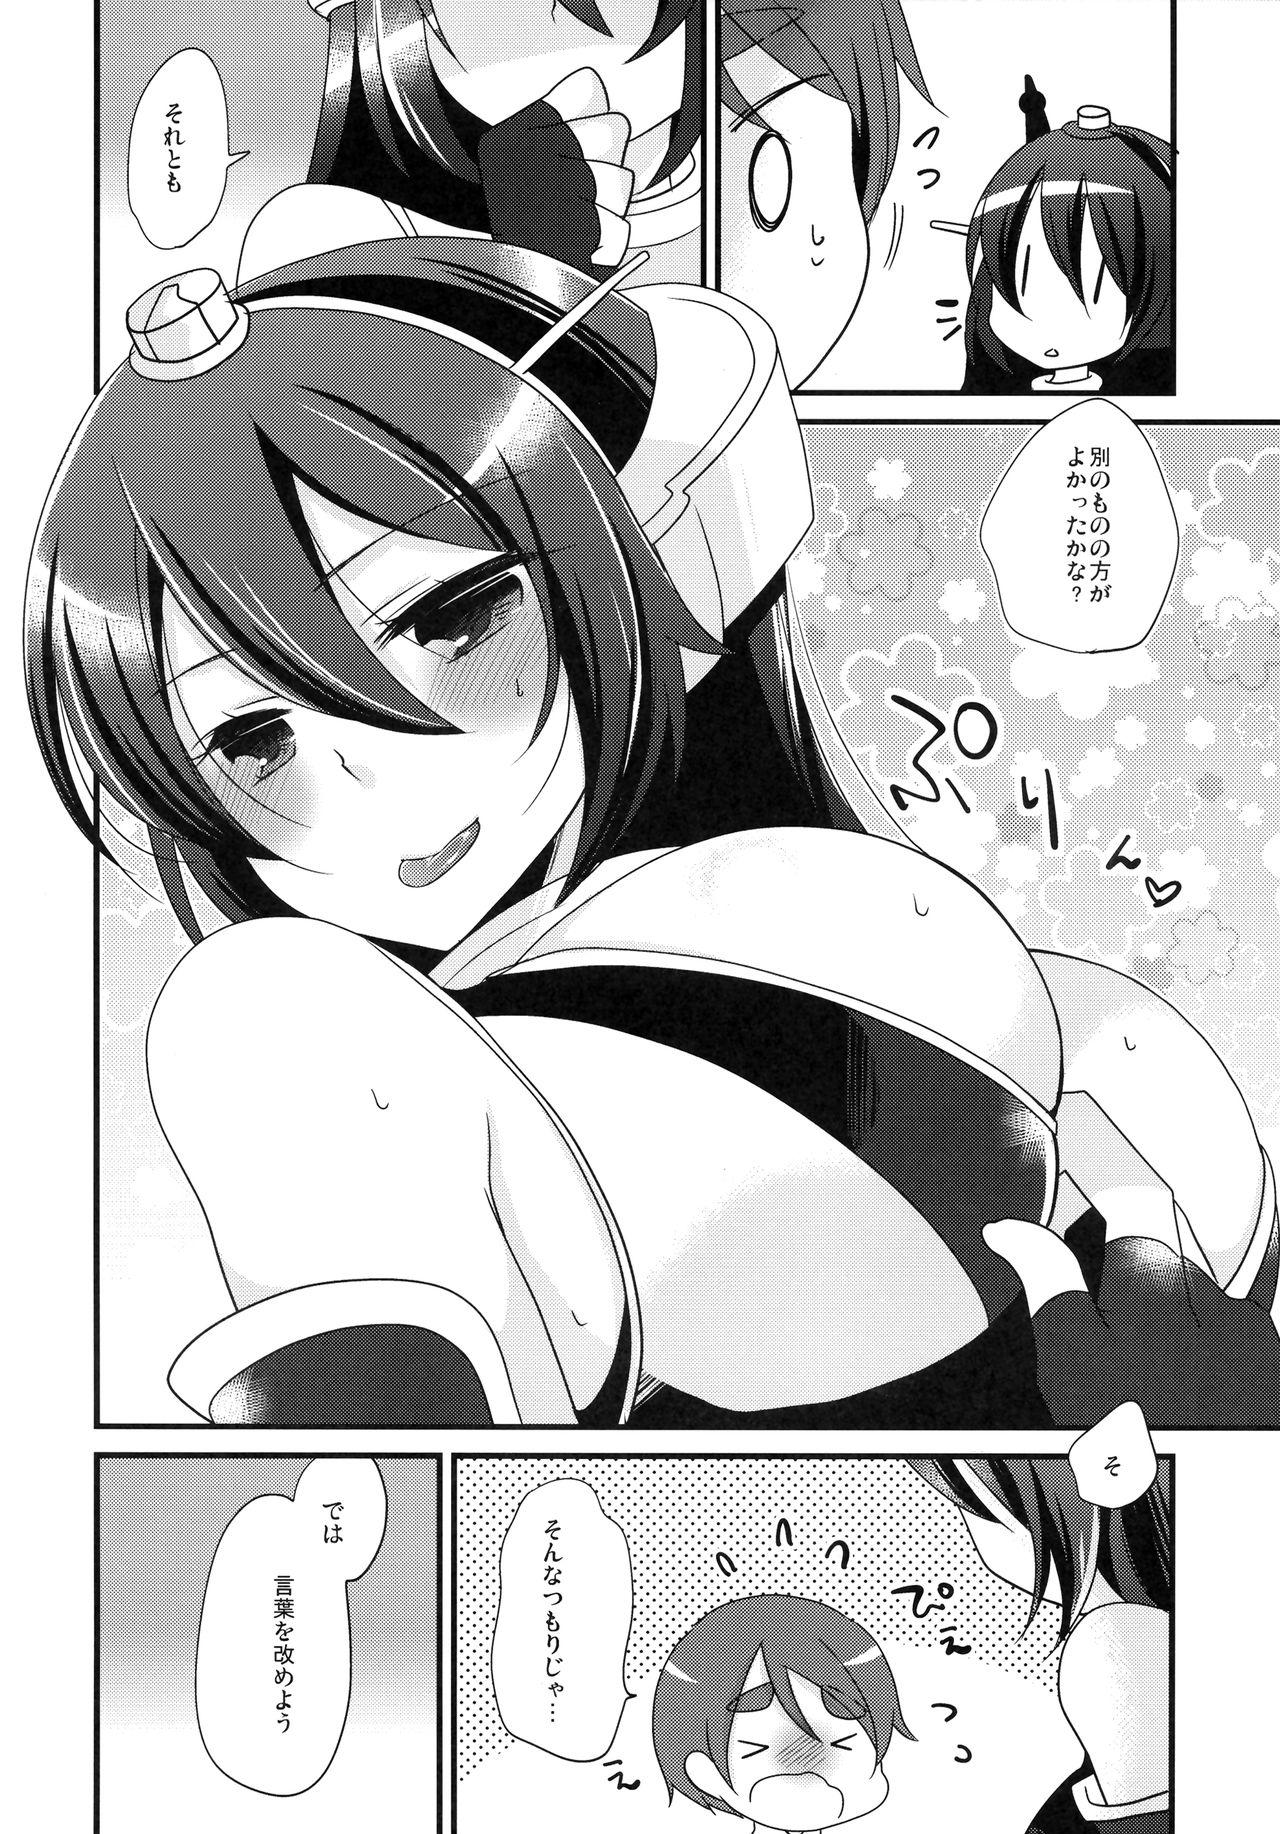 Boy The End of my Spiritually - Kantai collection Celebrity Sex Scene - Page 5